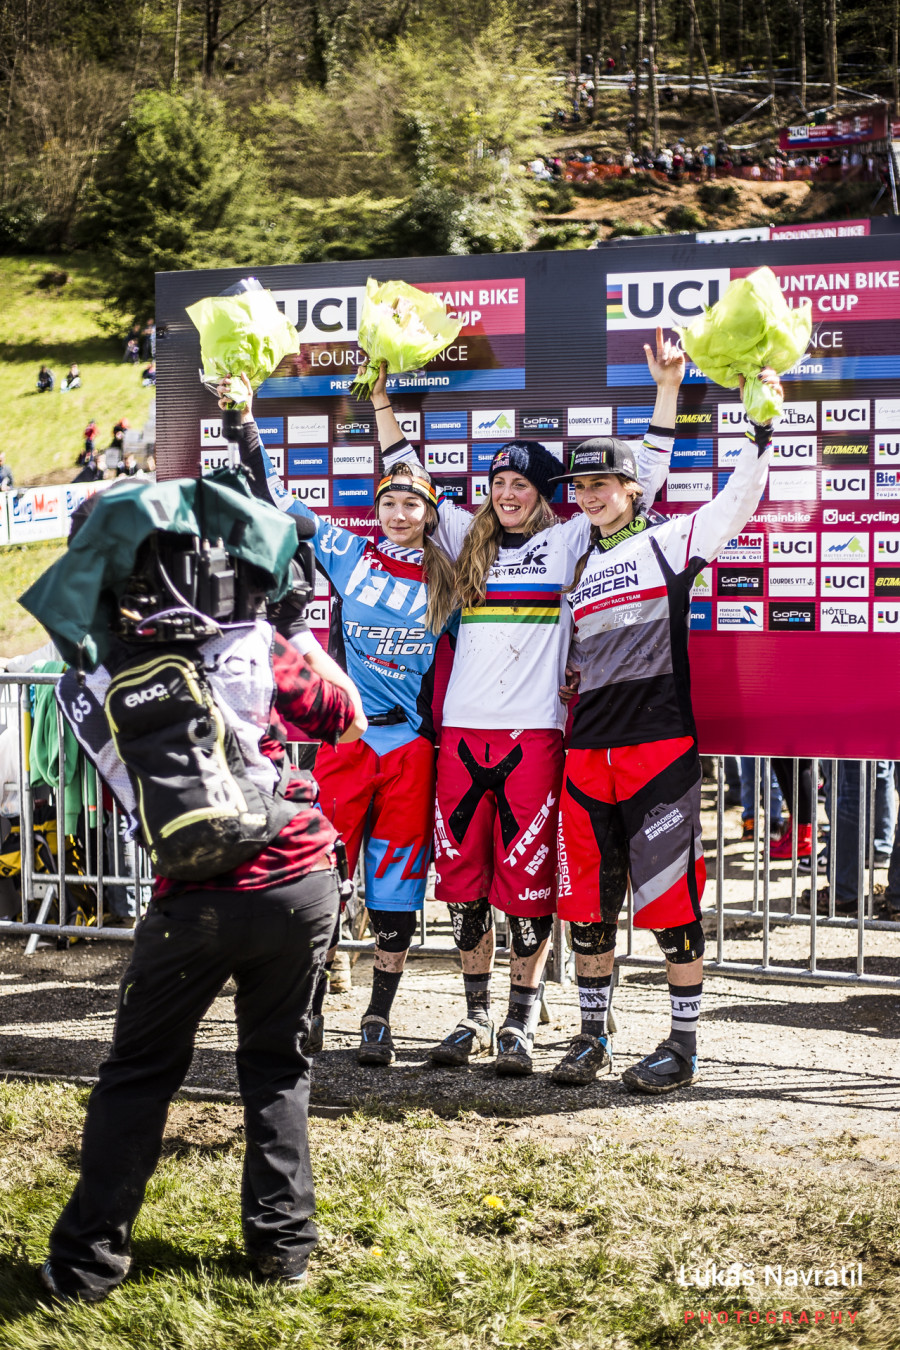 Tahnee Seagrave is looking fast this year finishing second. As has been a trend over the past few years Rachel Atherton took the win, the first on her new bike/team.